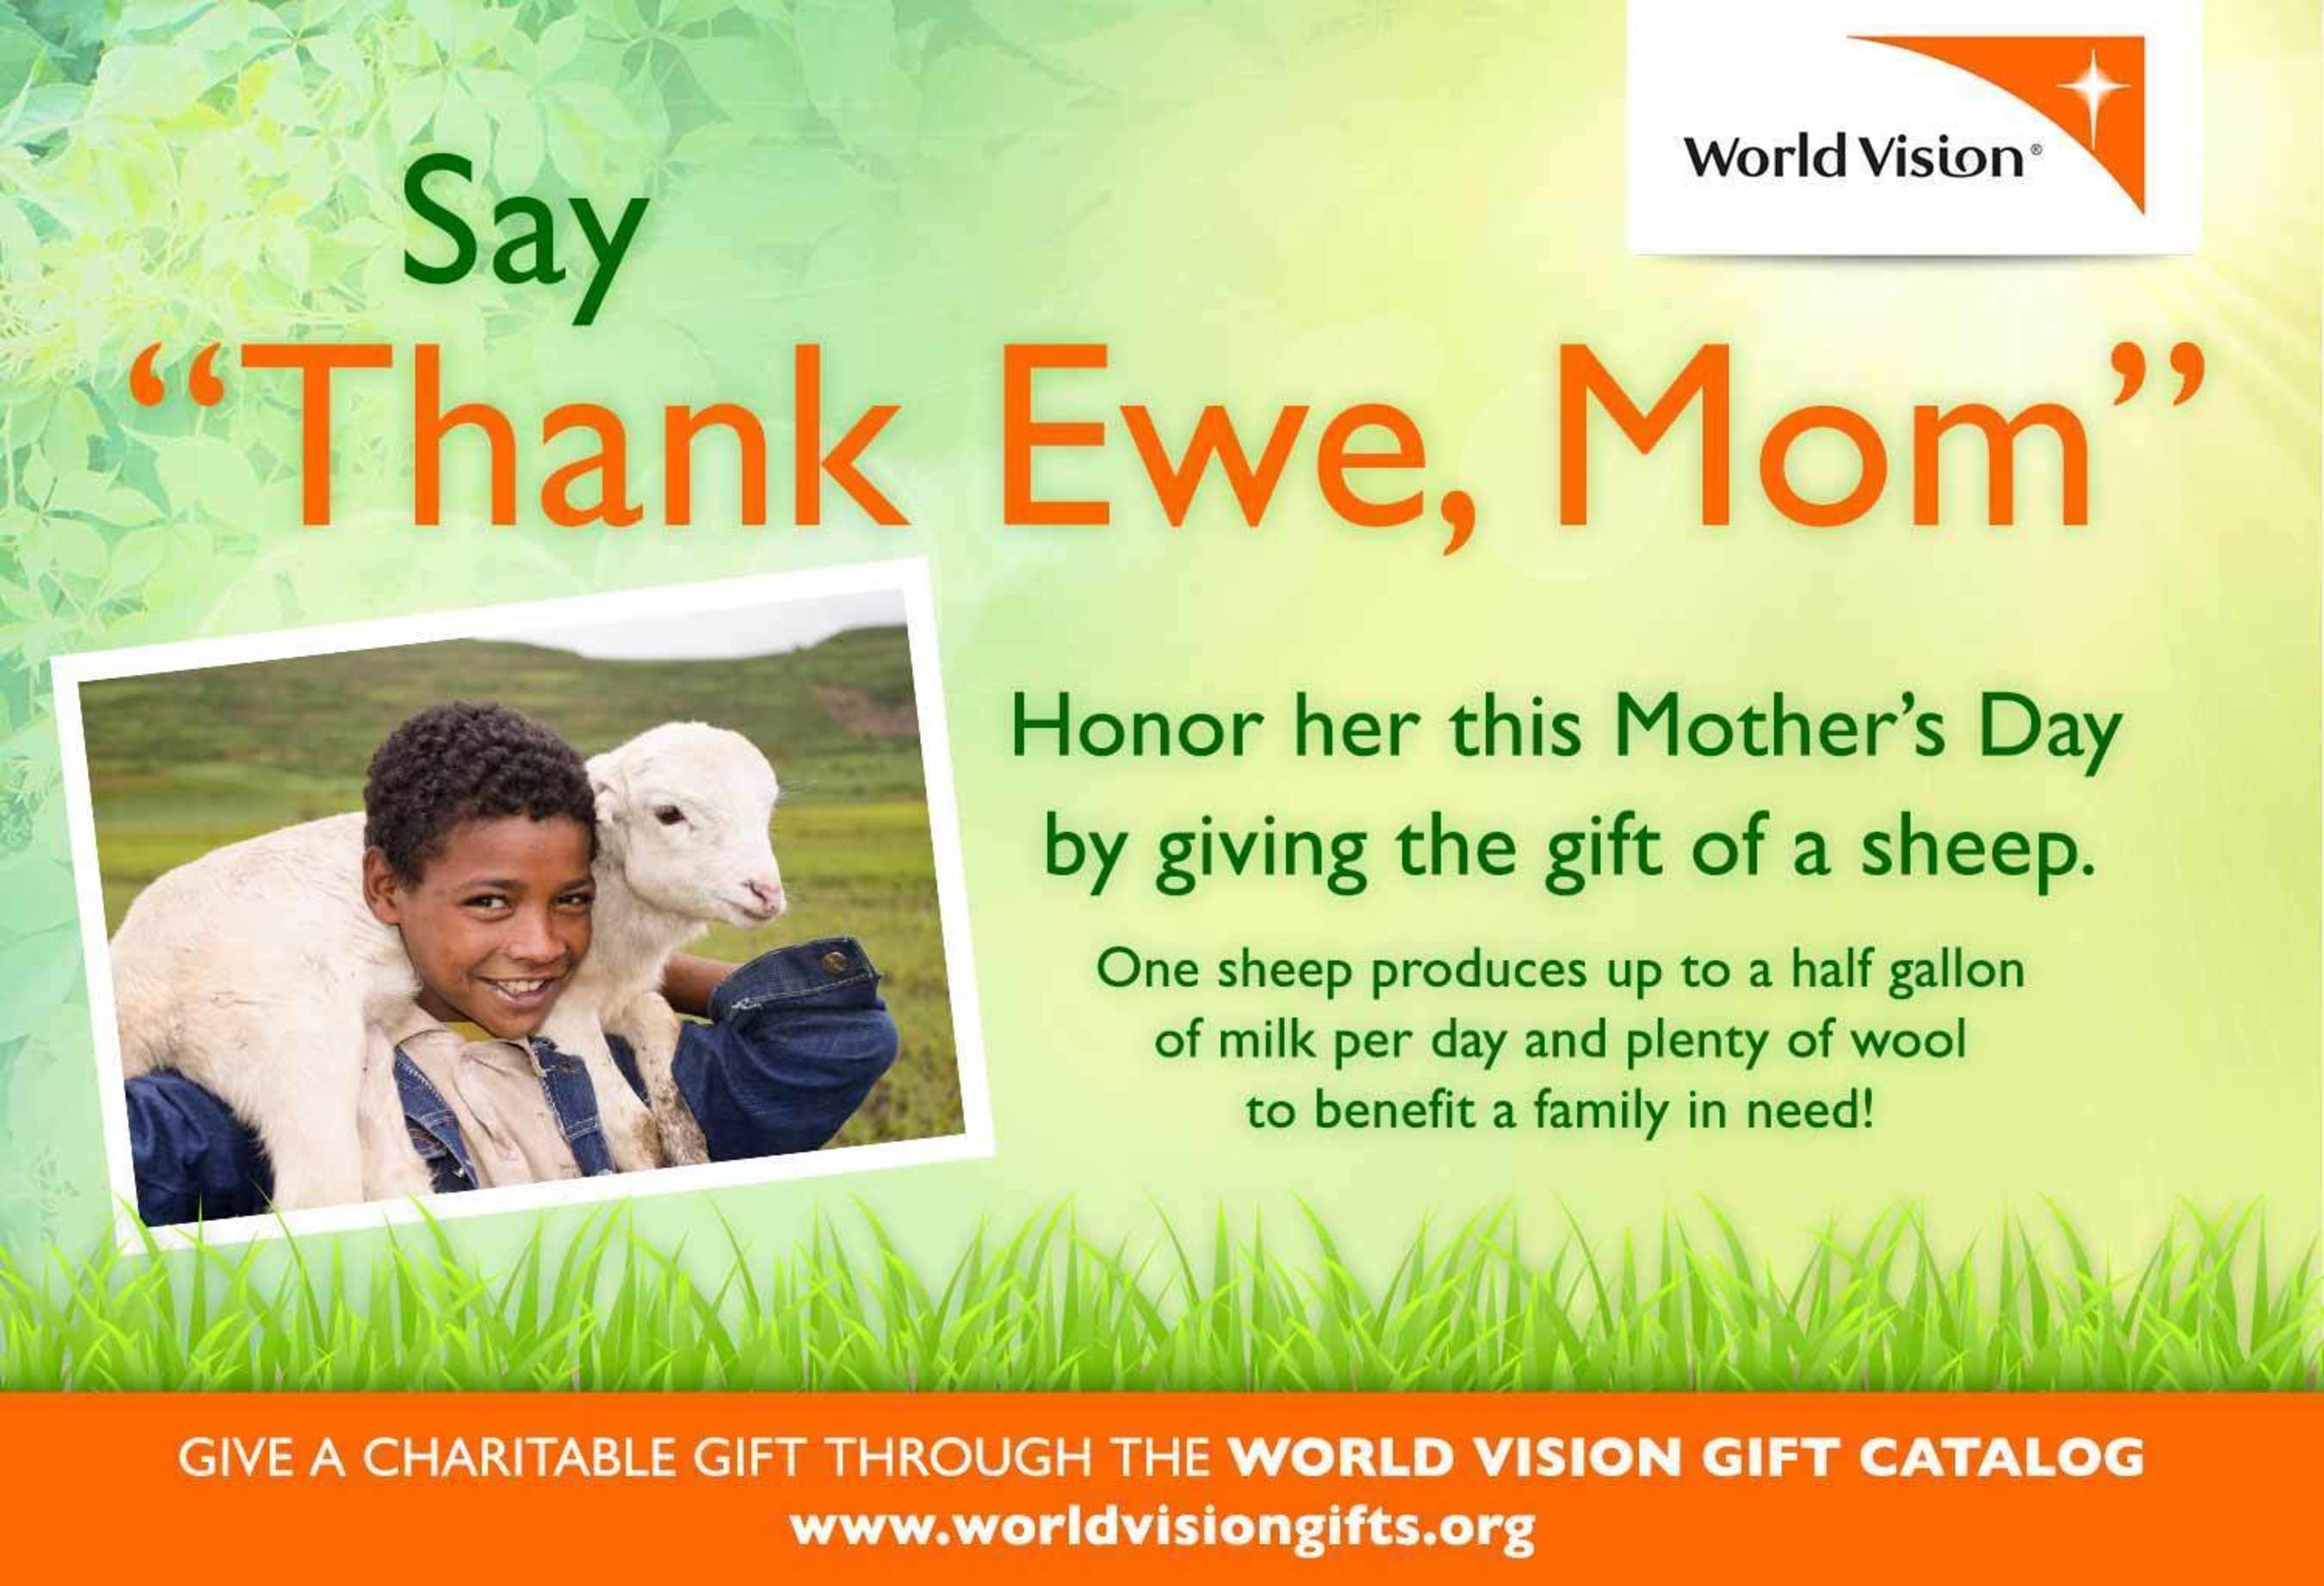 Donors Say "Thank Ewe, Mom" with Sheep in Her Honor (PRNewsFoto/World Vision)